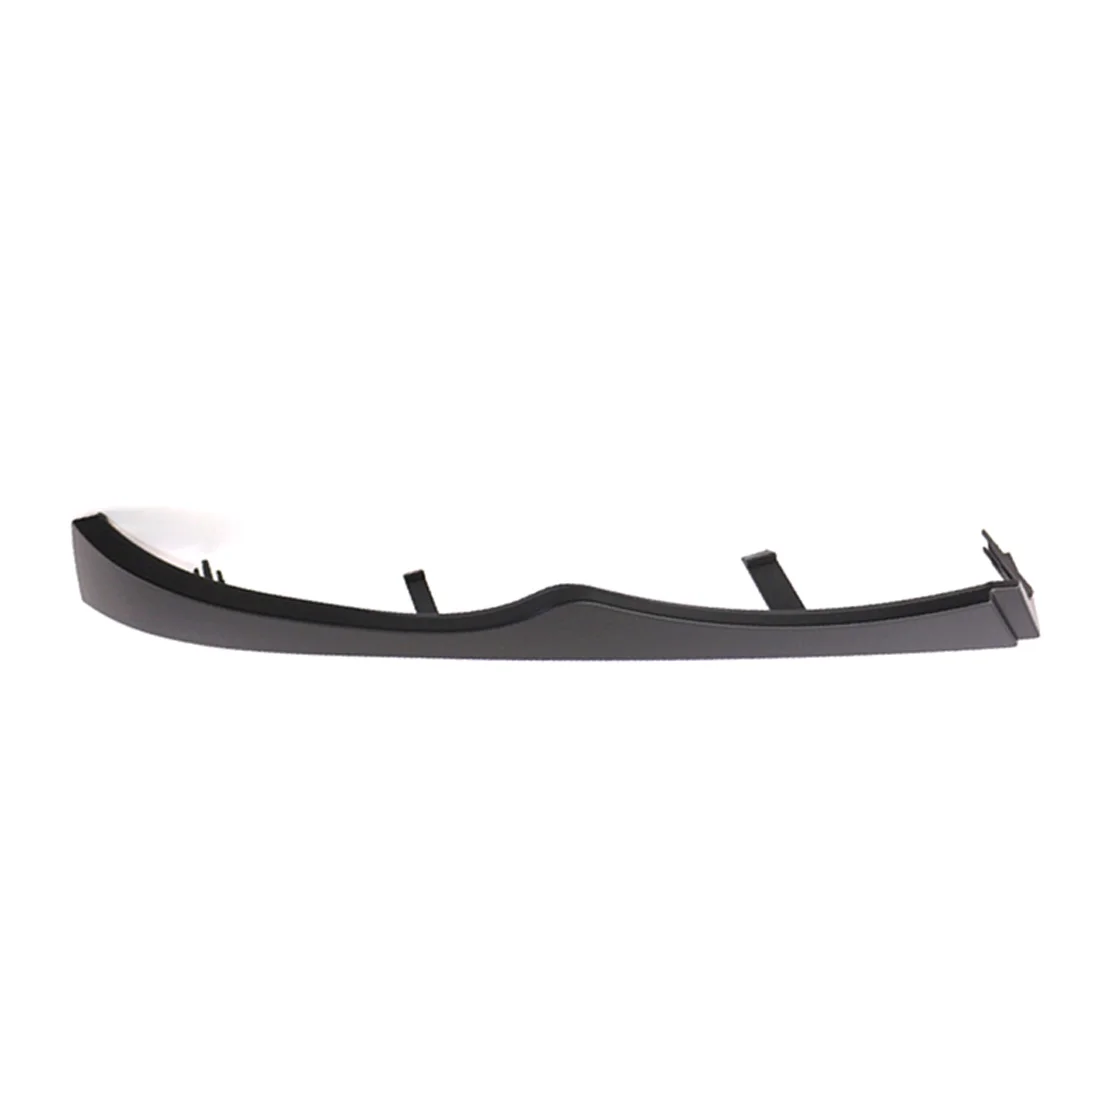 

51130030406 Right Front Headlight Under Cover Strips Trim for E46 325I 330I 2002-2005 Car Head Light Sealing Plate